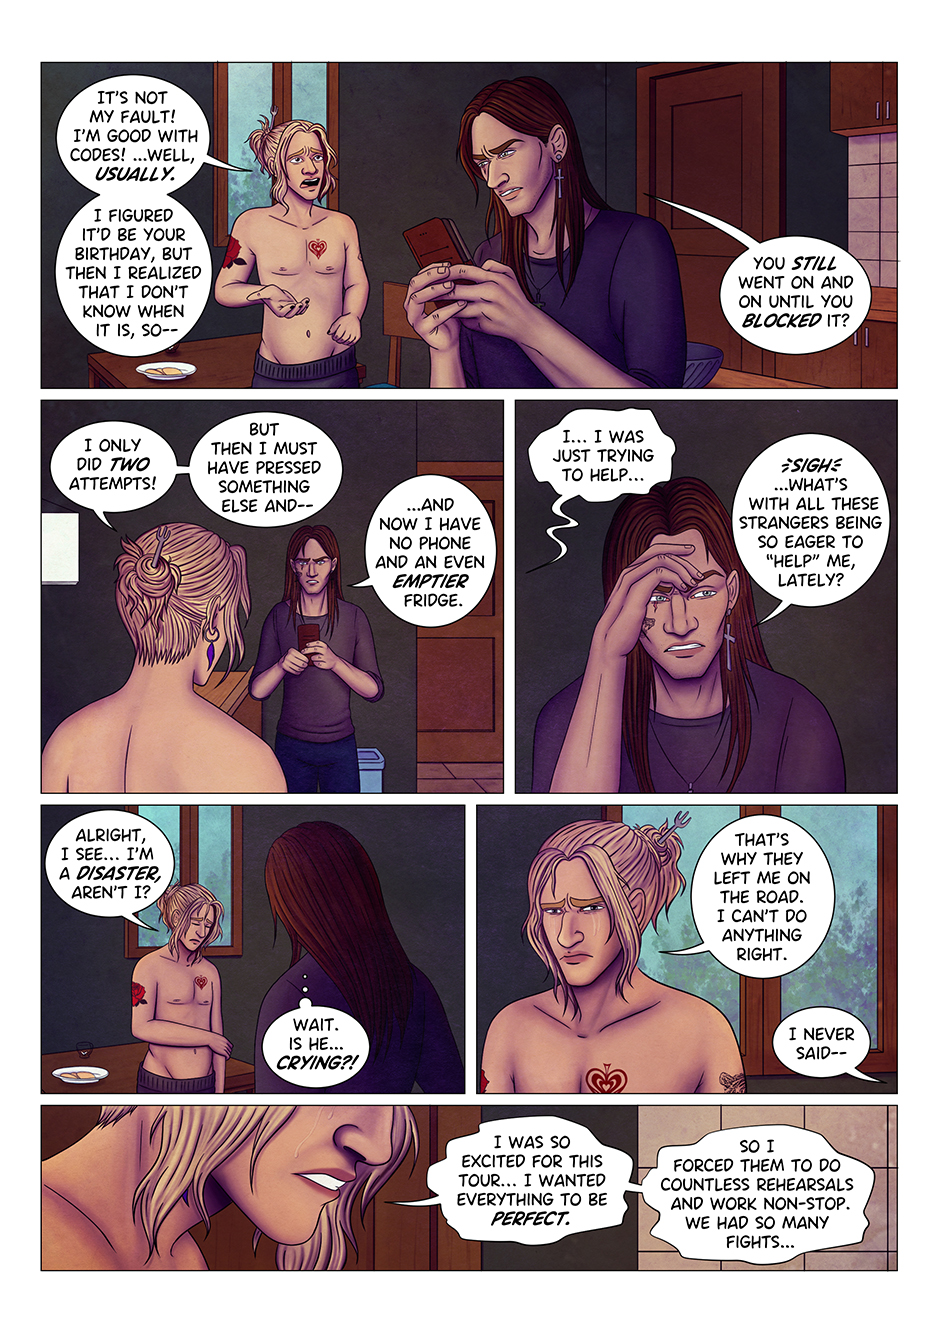 Comic page in which Aaron tries to explain how he accidentally broke Adrian's phone. Adrian isn't pleased and Aaron has a little bit of a meltdown.